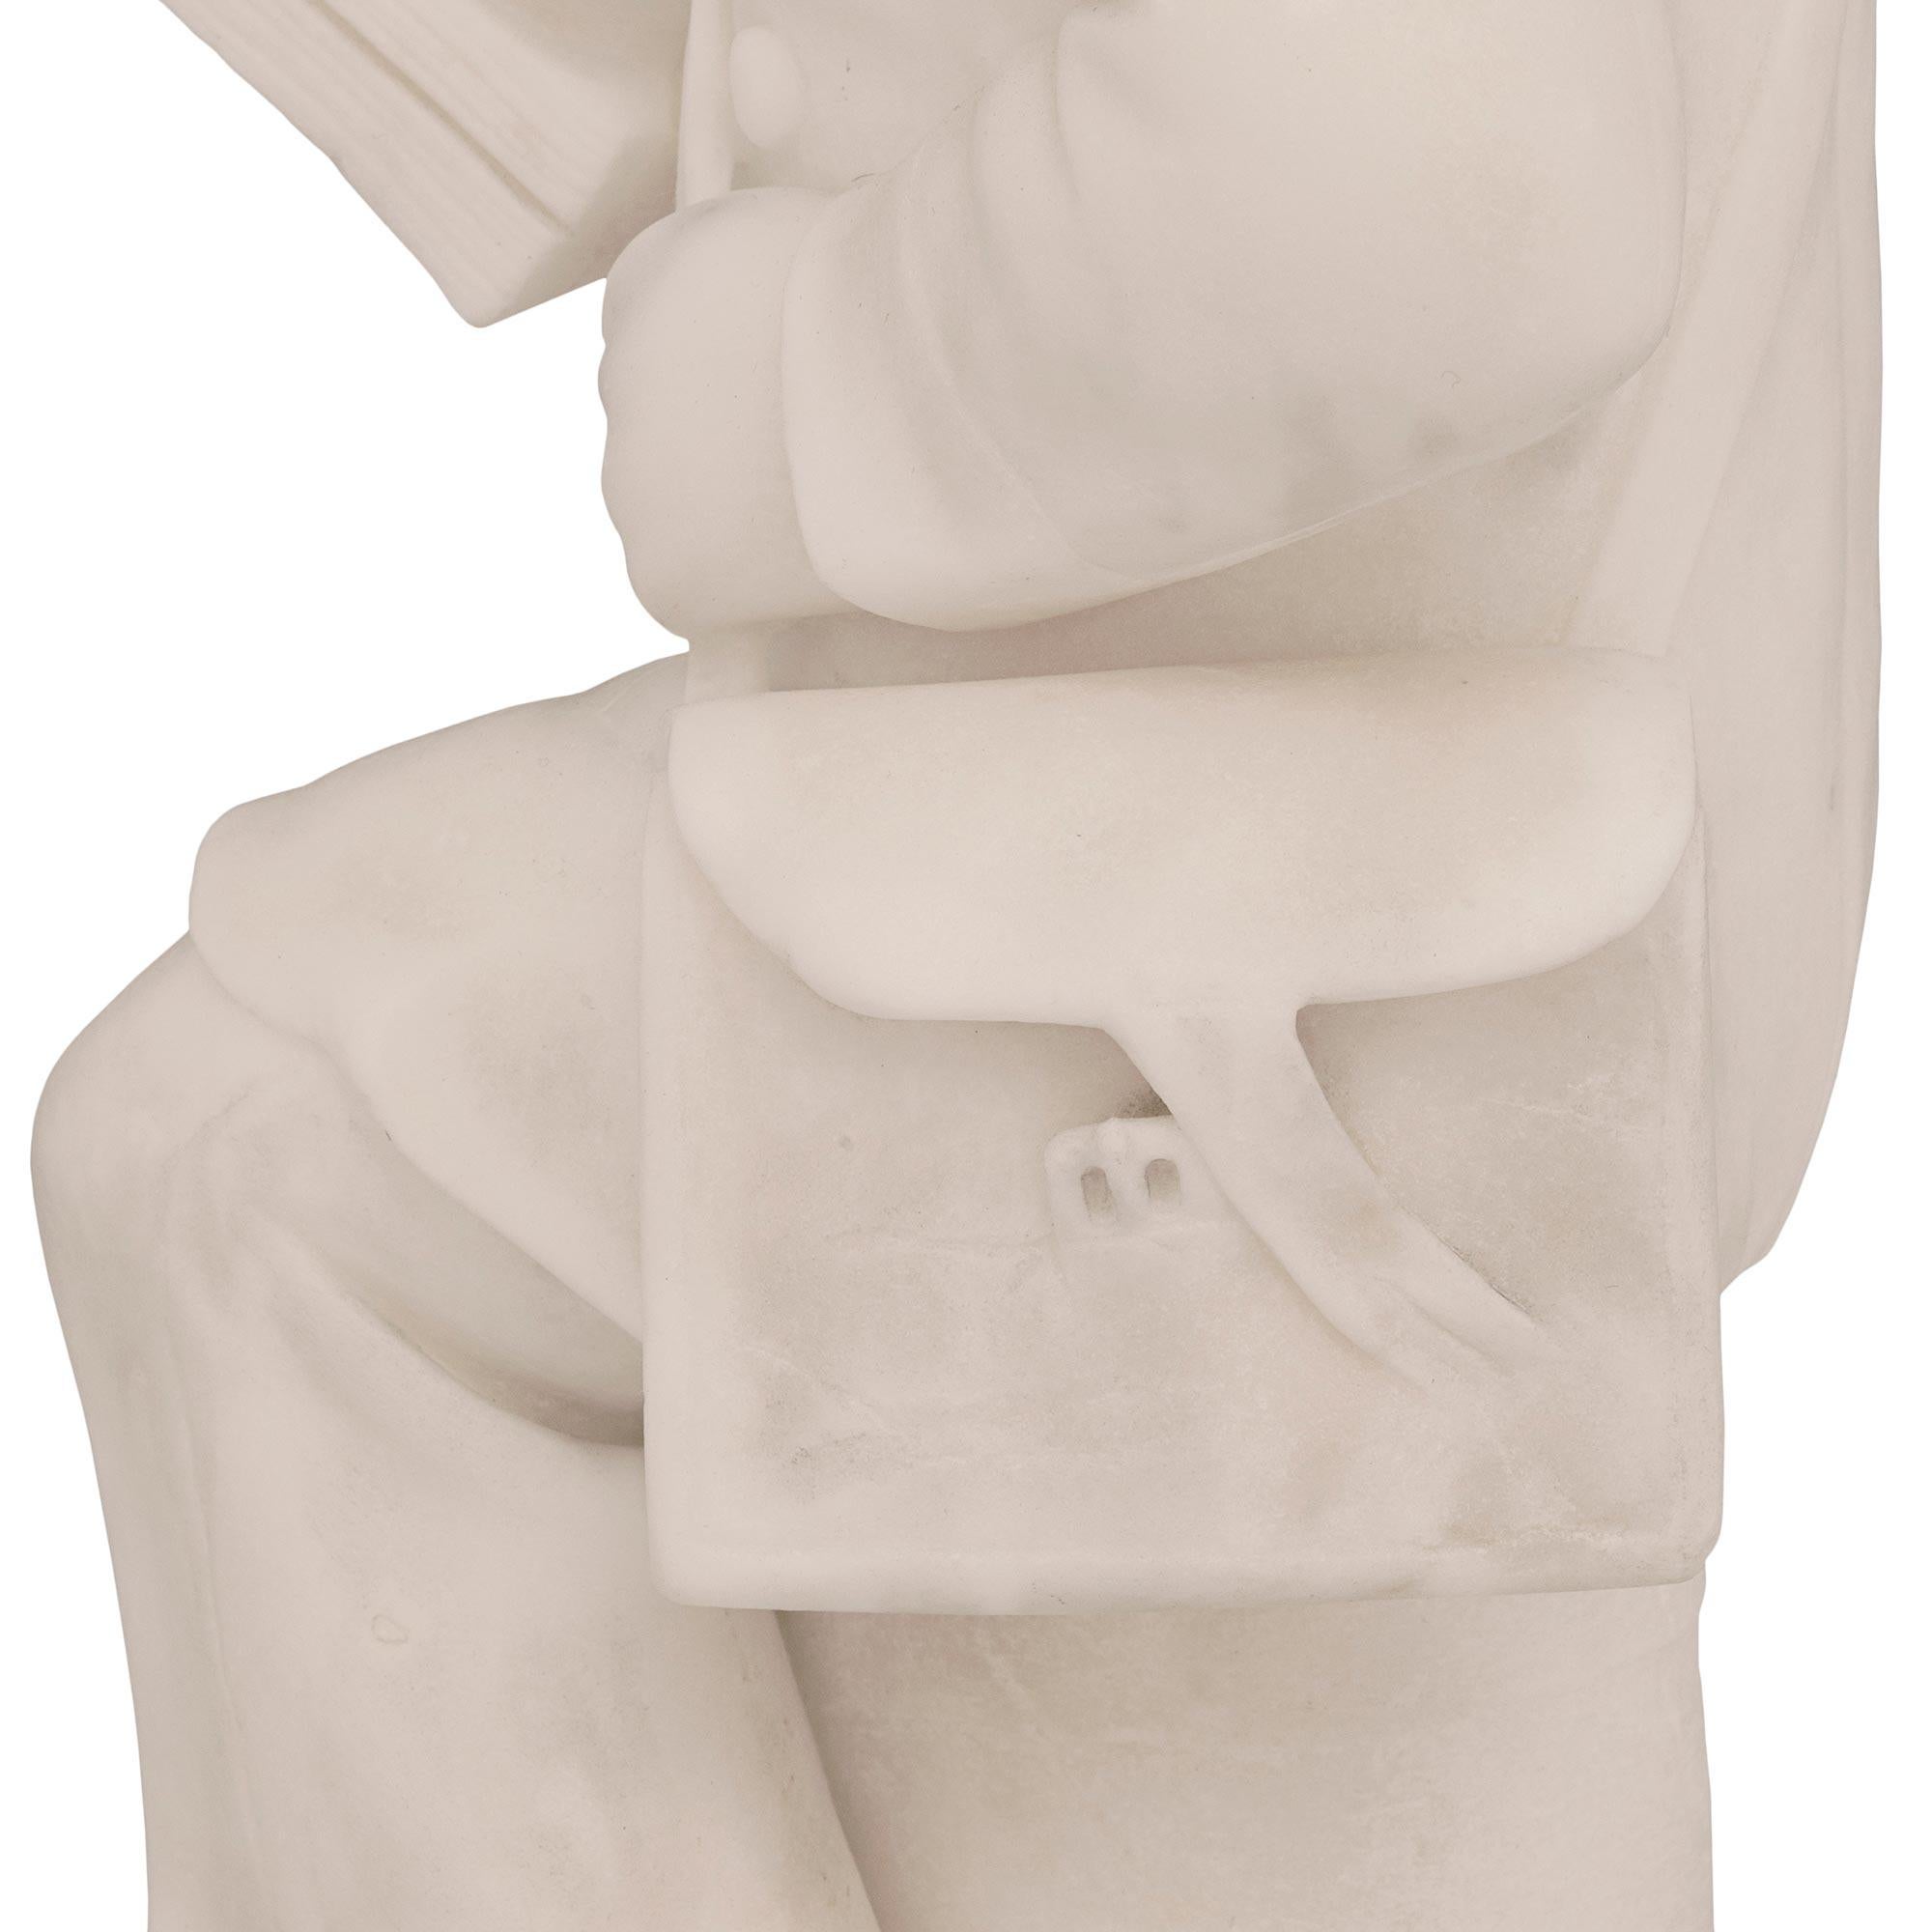 Italian 19th Century White Carrara Marble Statue of a Young Boy Reading a Book For Sale 4